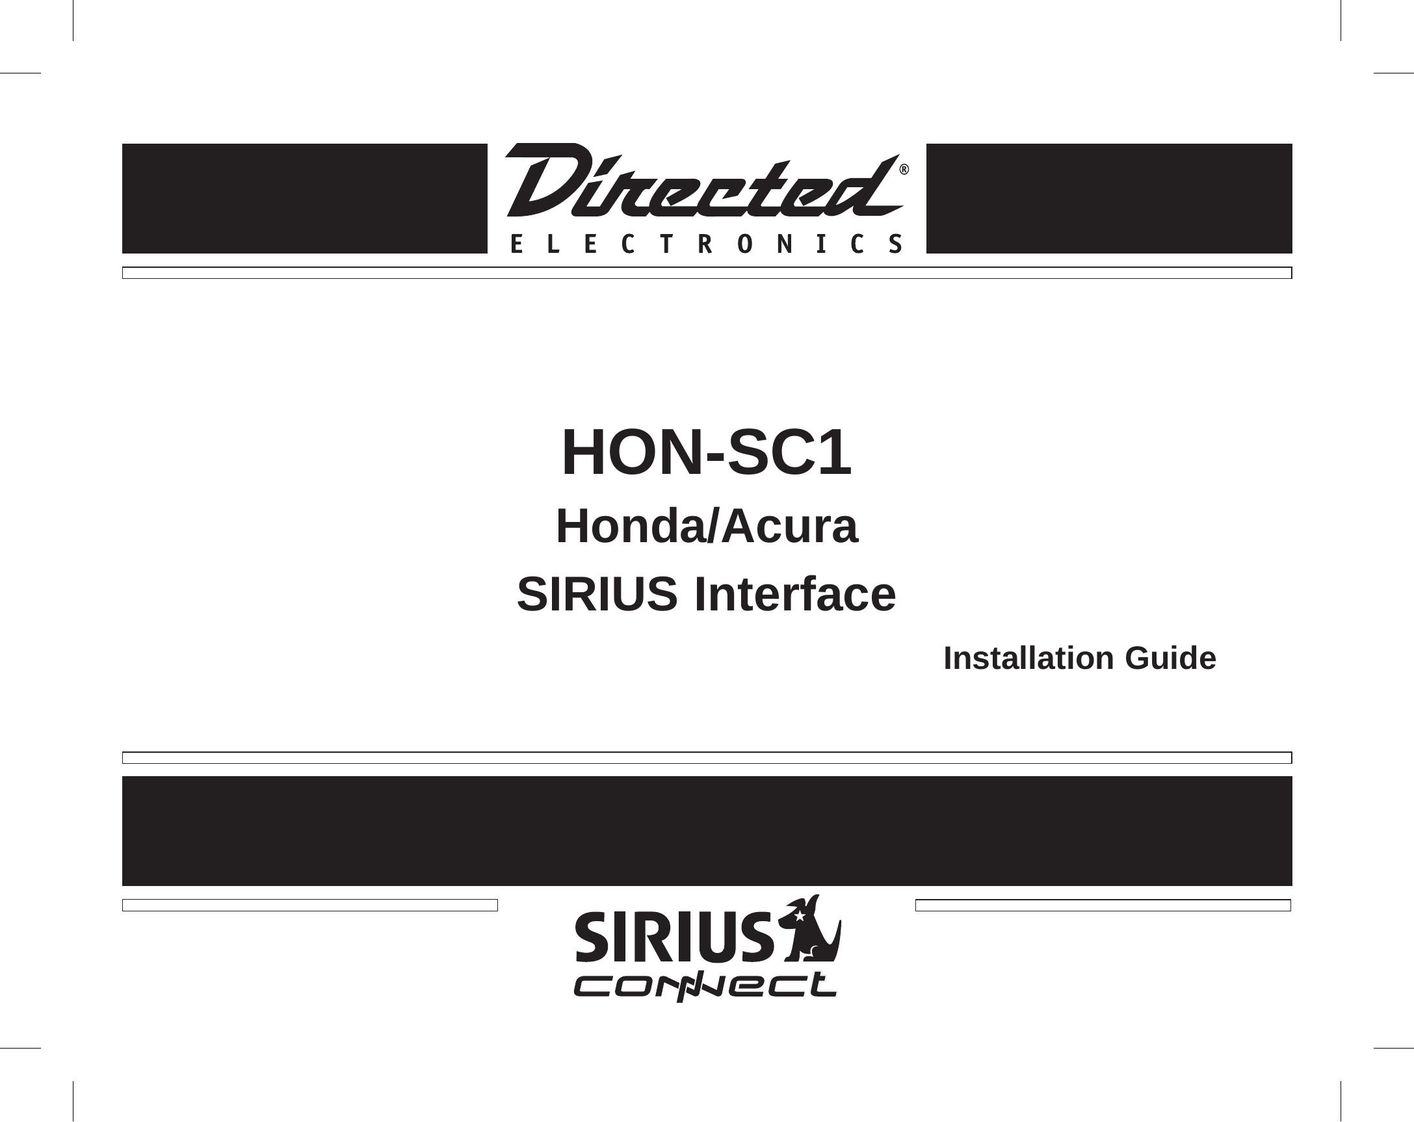 Directed Electronics HON-SC1 Network Card User Manual